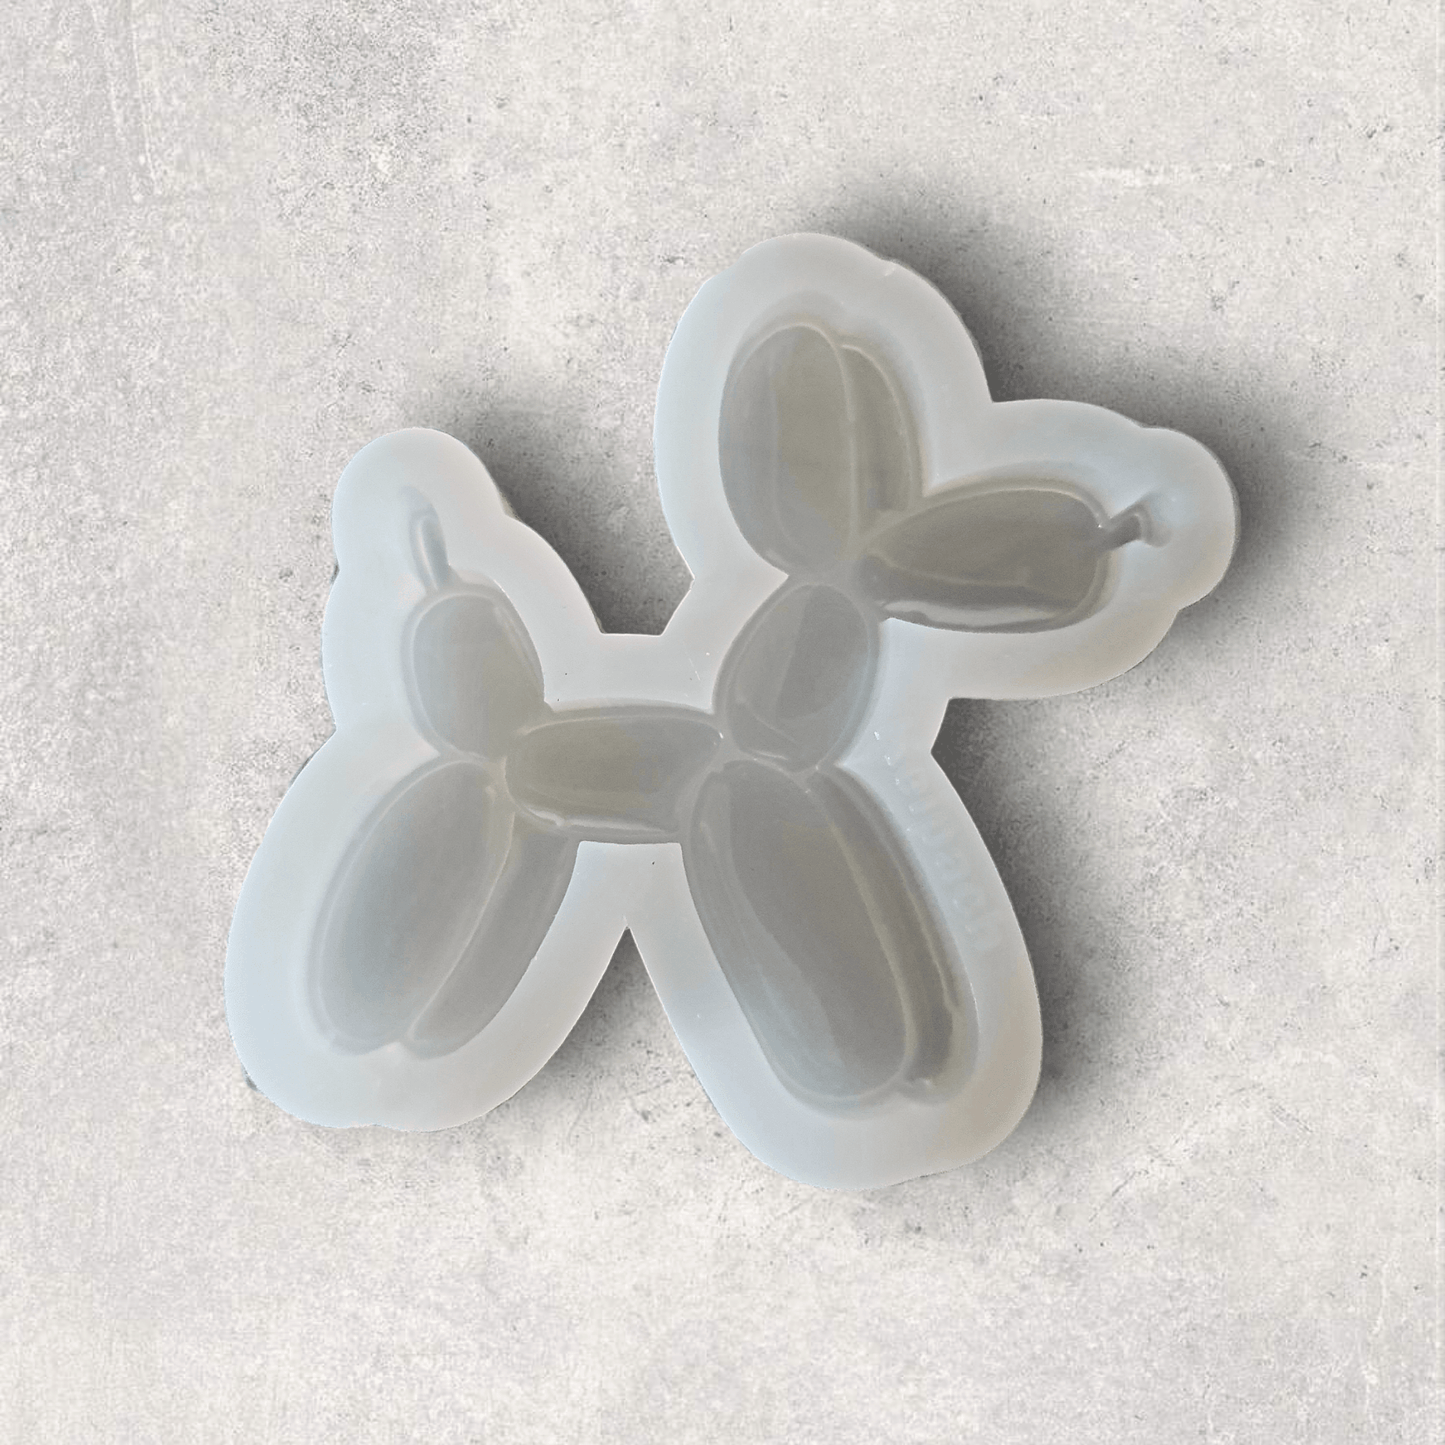 Balloon Dog Silicone Resin Mould - Keipach